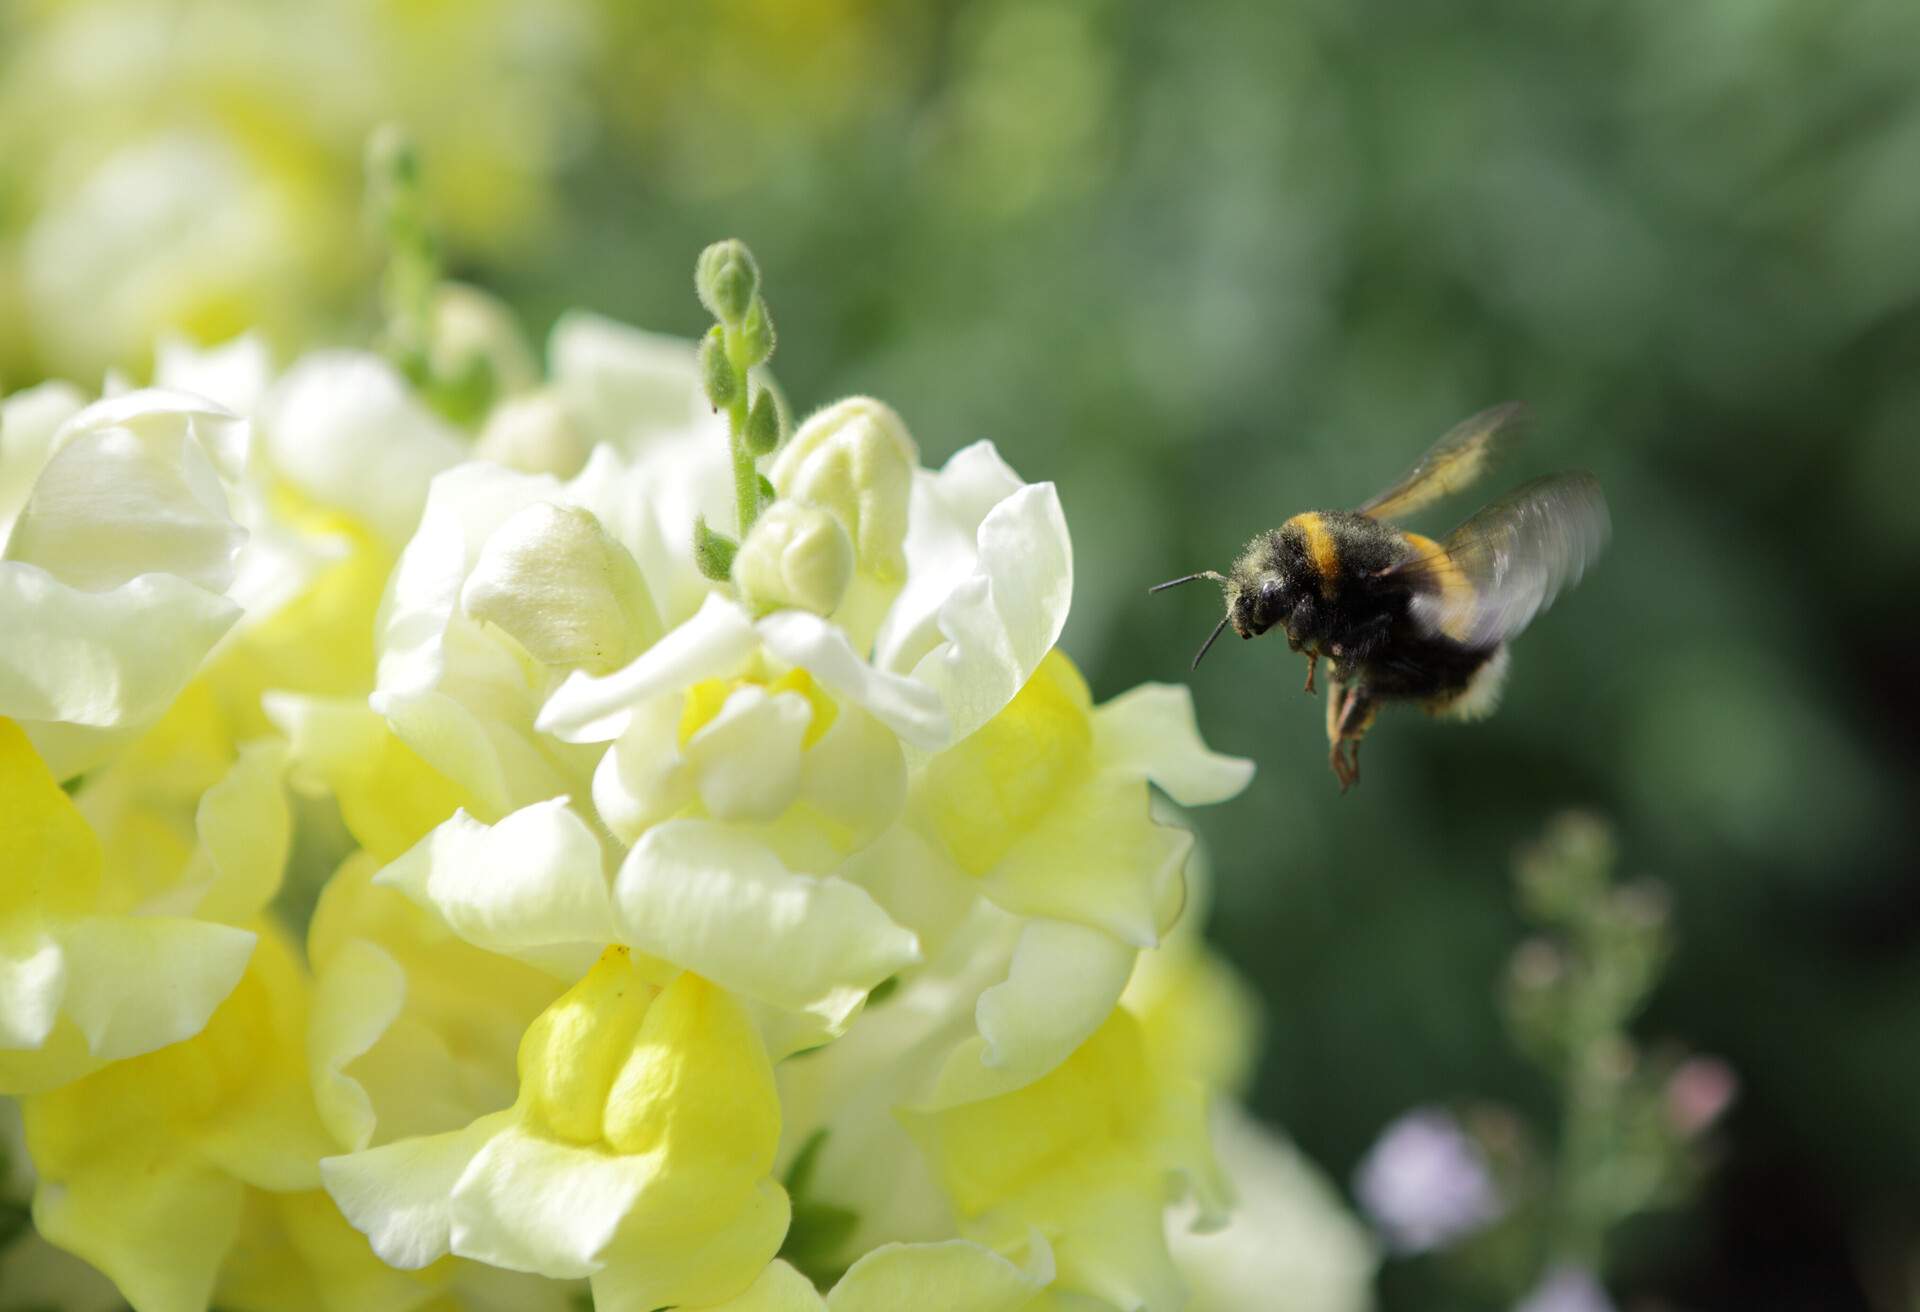 A Bumblebee (Humler) in flight approaching a Snap Dragon (Antirrhinum) flower.   Depth of field with focal point on Bee and flower foreground.  Motion blur of wings.